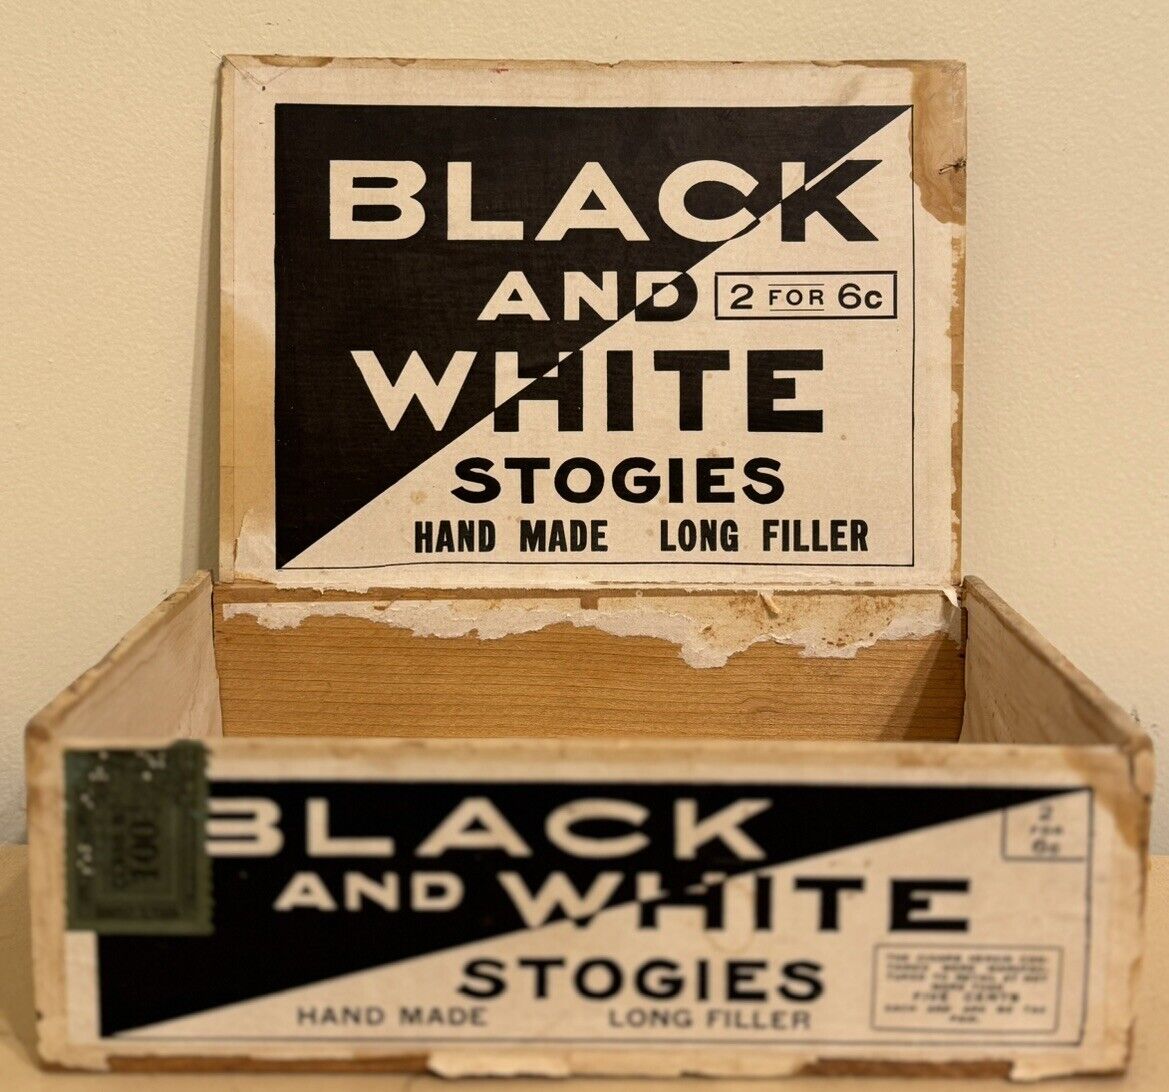 Antique Black And White Stogies Cigar Box 100 Ct Large Size Advertising Tobacco